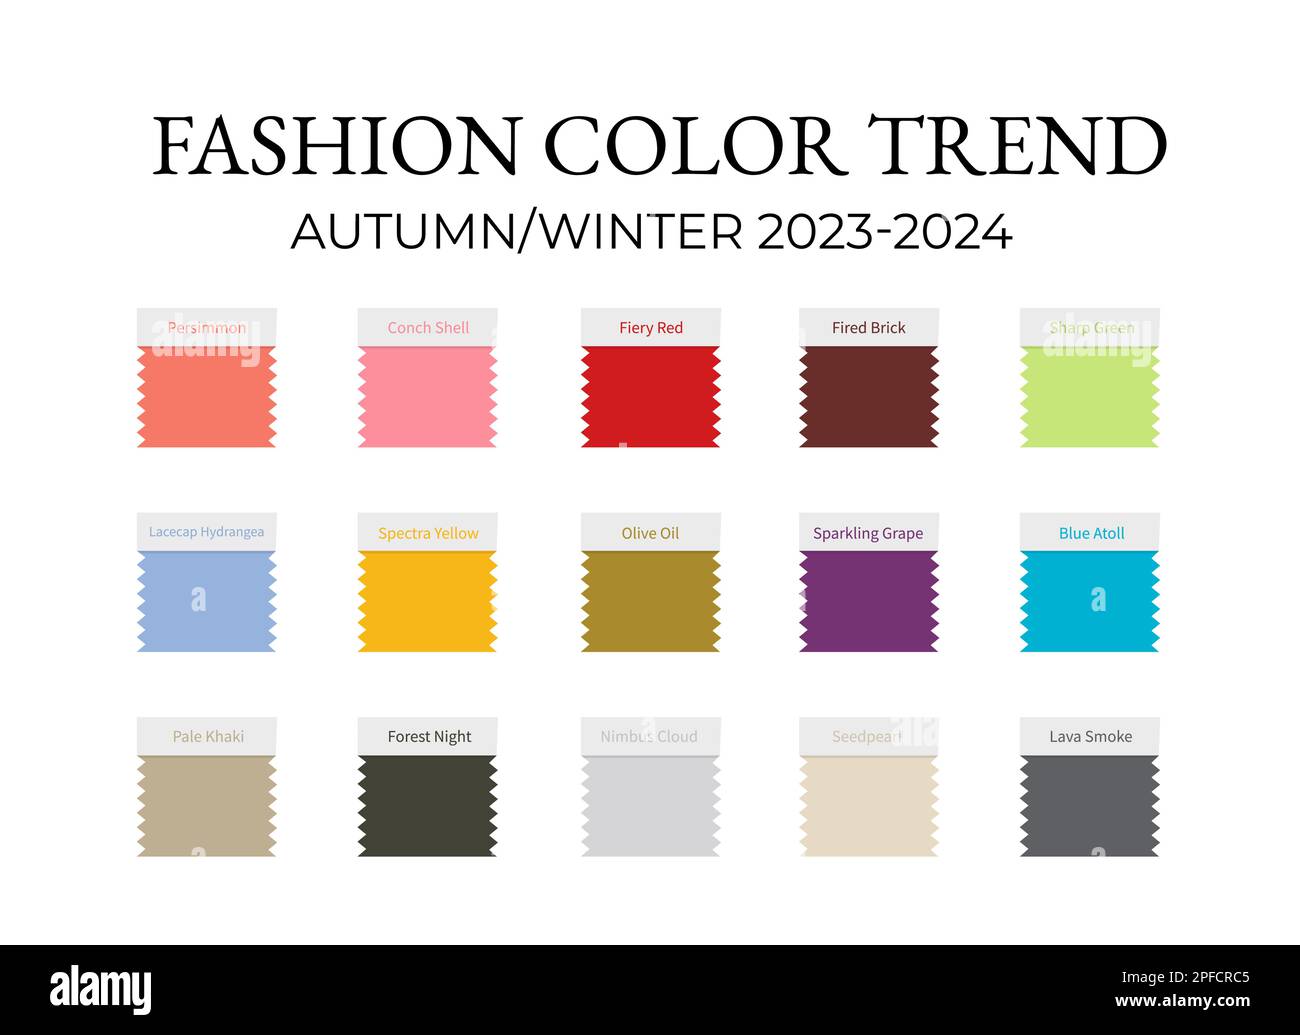 What Are The Fashion Colors For Fall 2024 - Colly Rozina